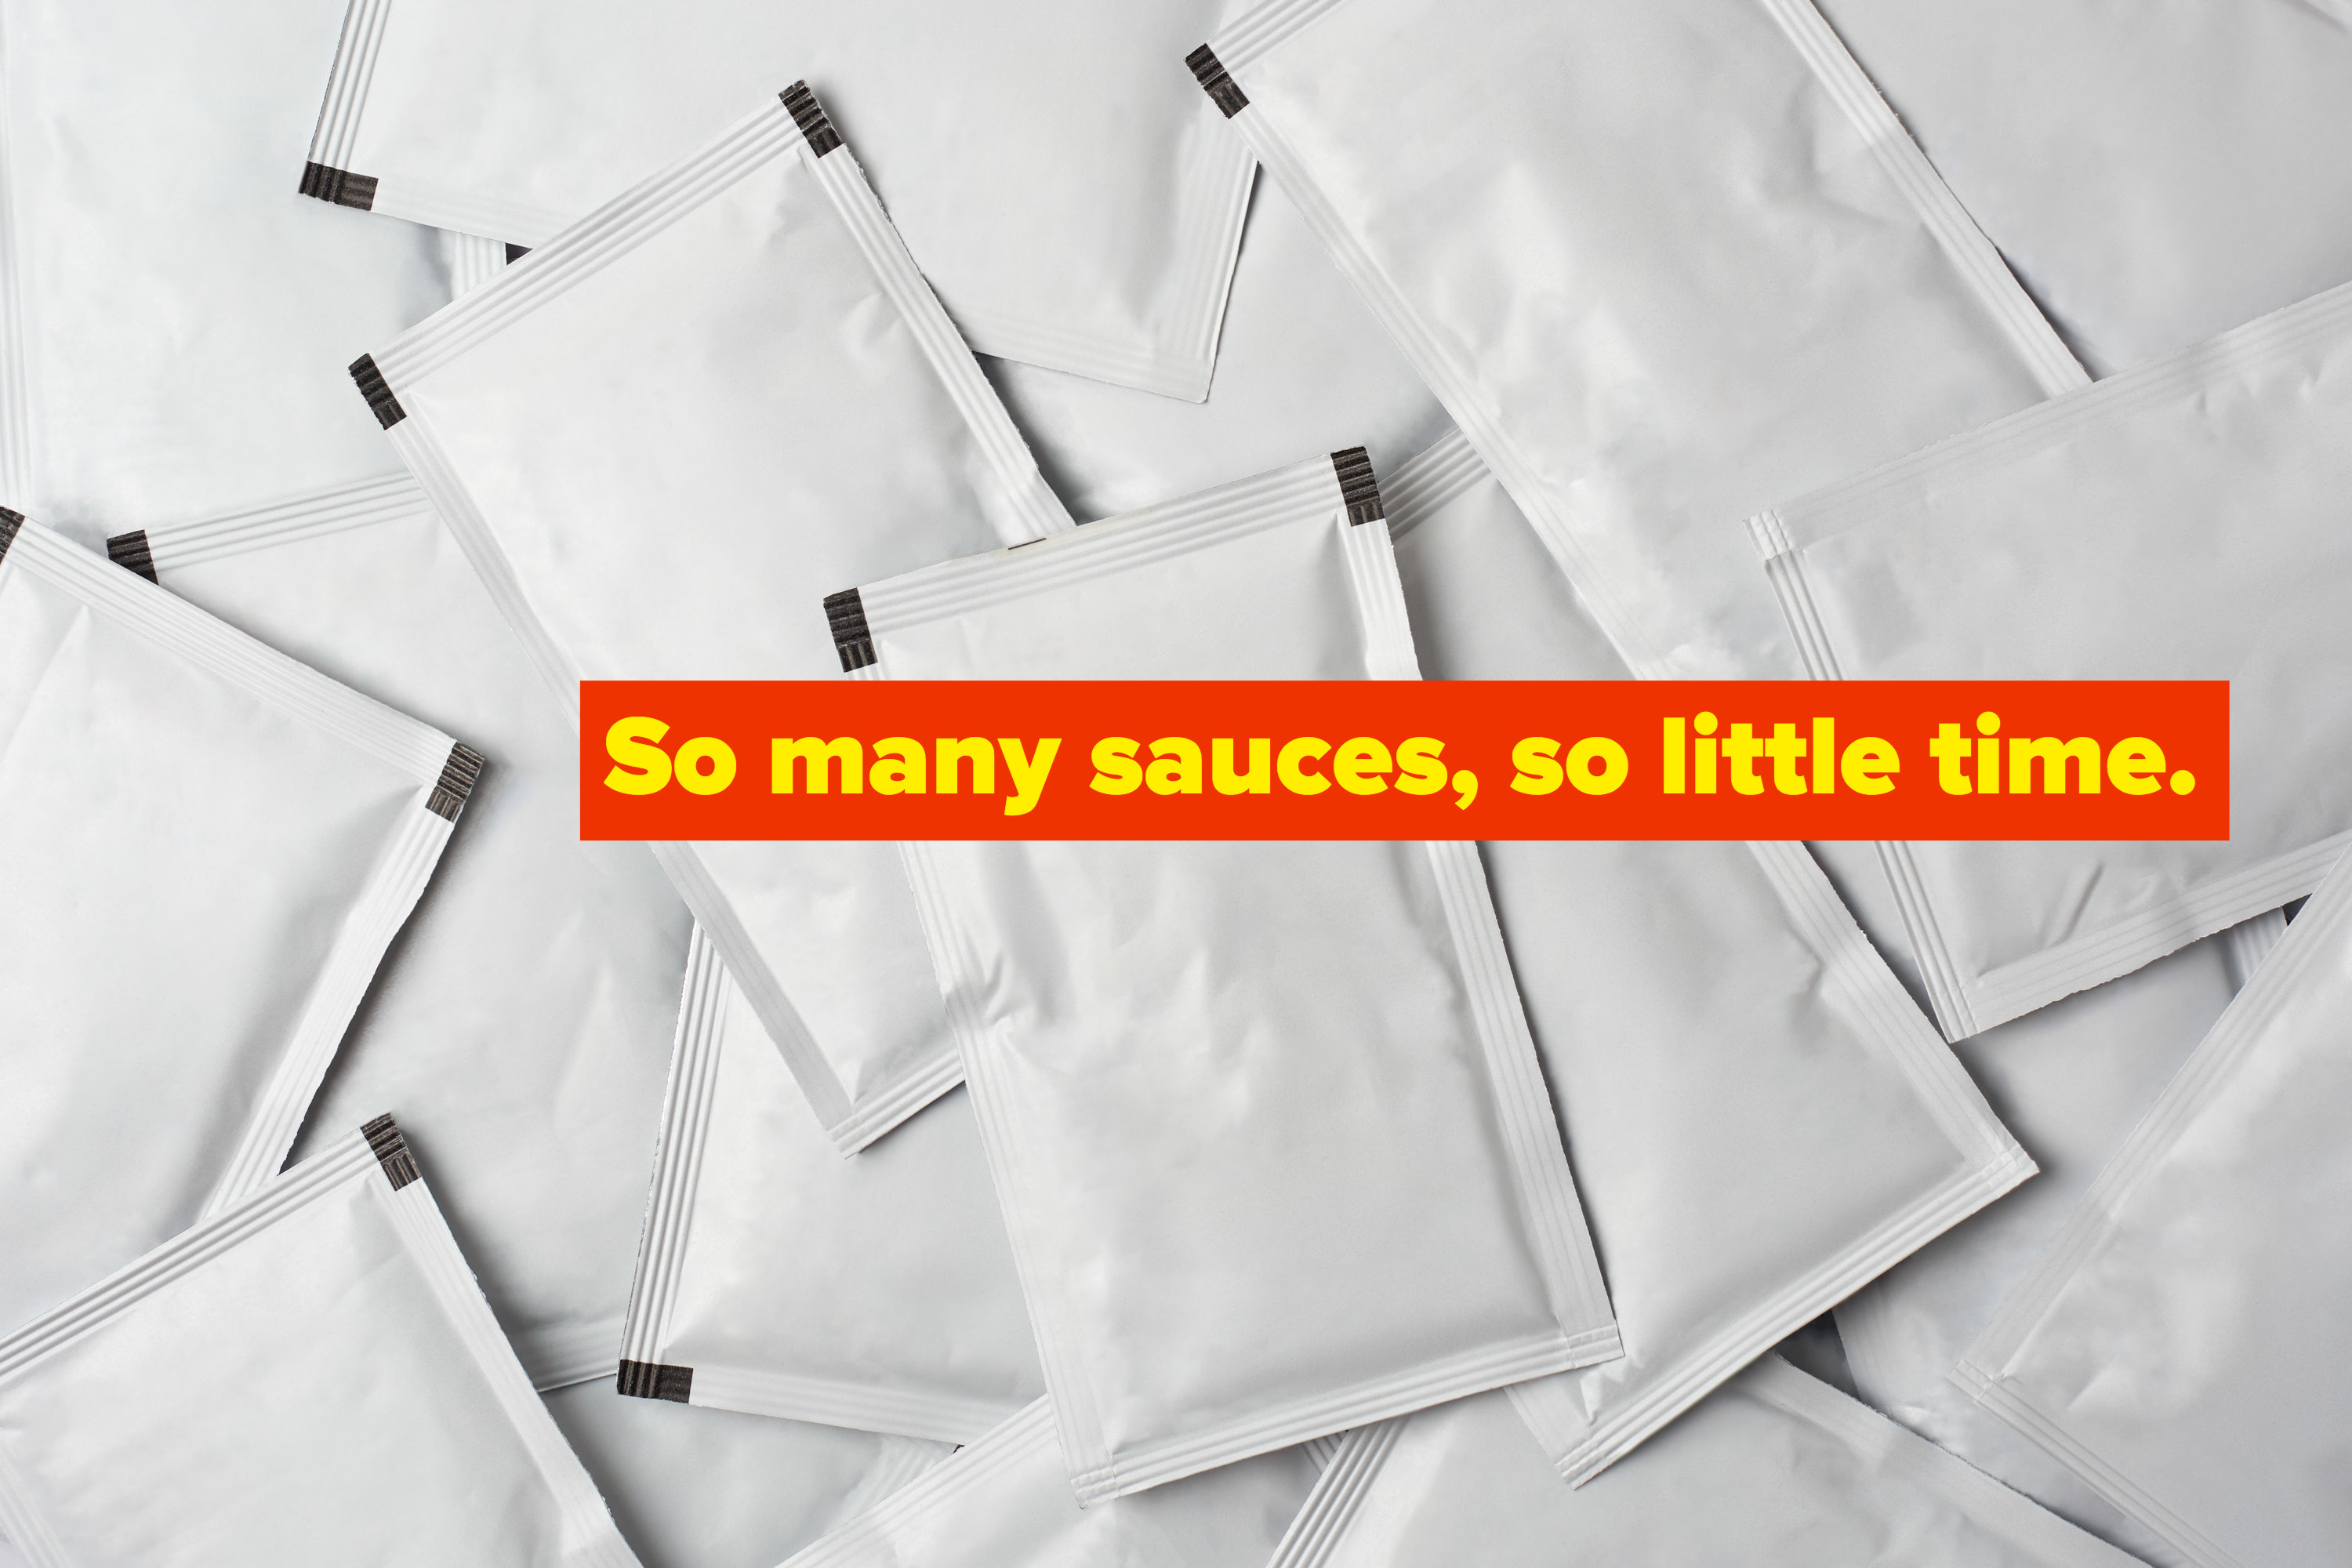 Blank condiment packages that have been piled together haphazardly